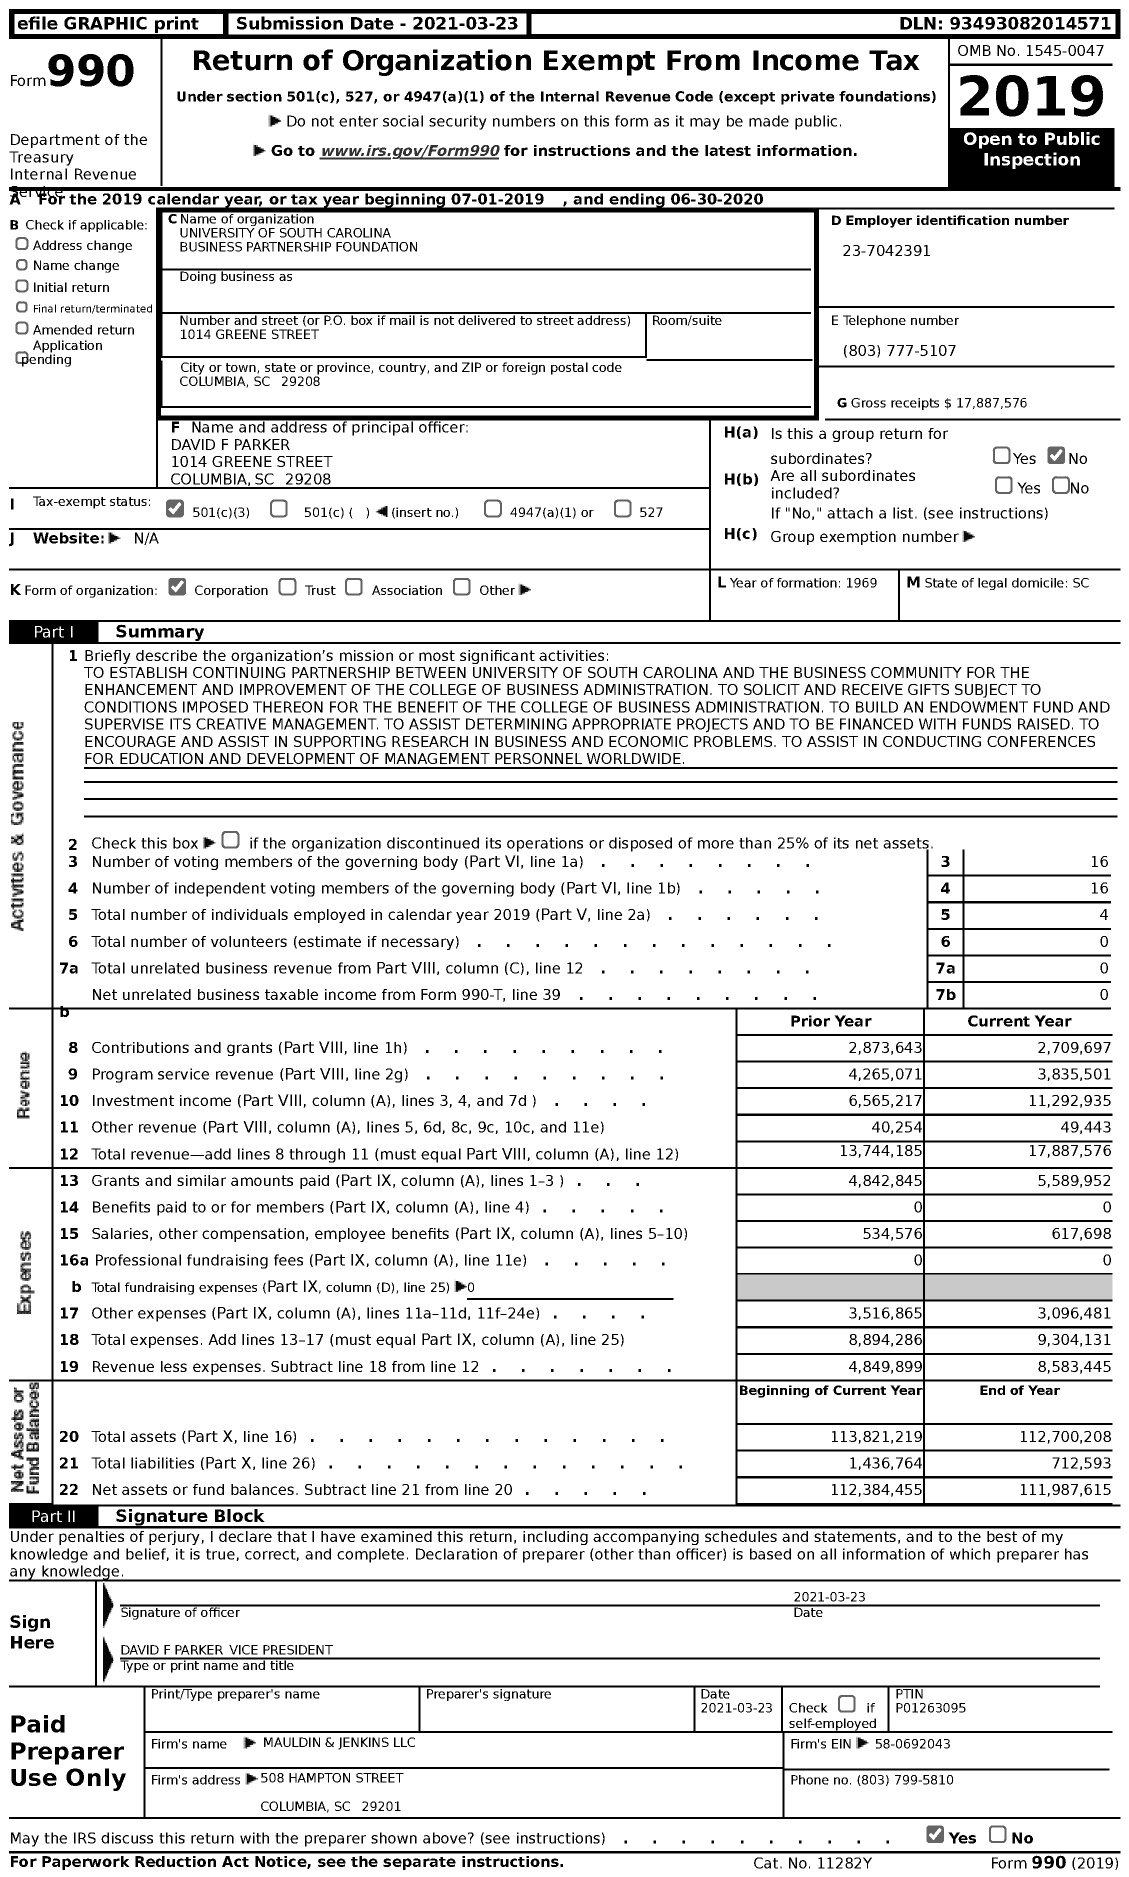 Image of first page of 2019 Form 990 for University of South Carolina Business Partnership Foundation